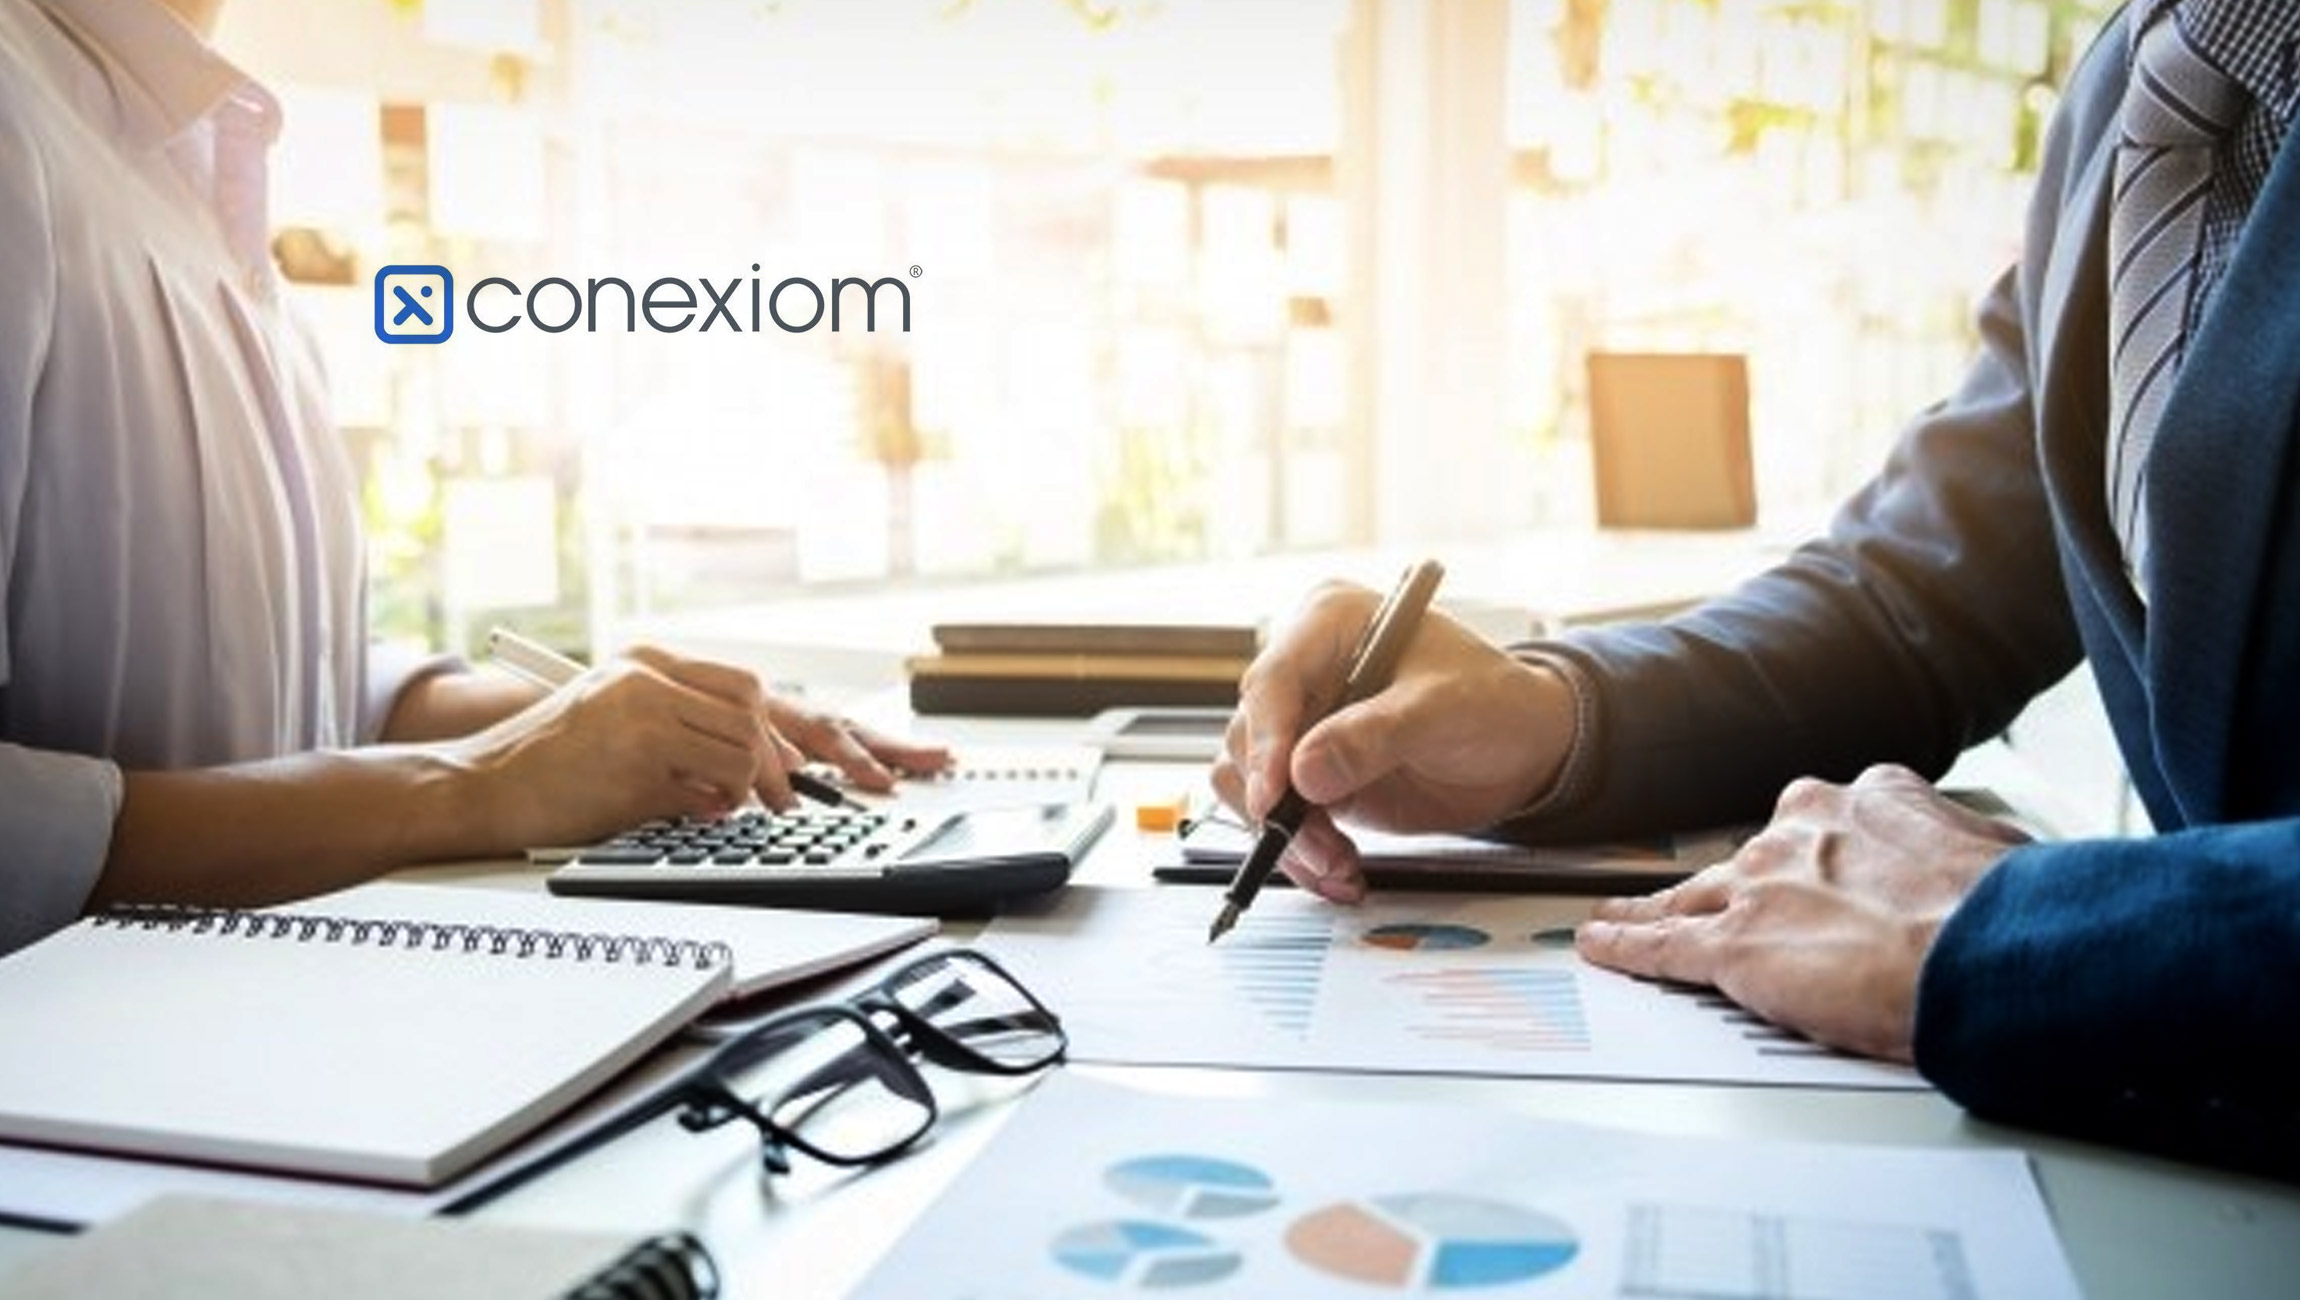 Conexiom Reports Record Performance, New Leadership to Drive Growth